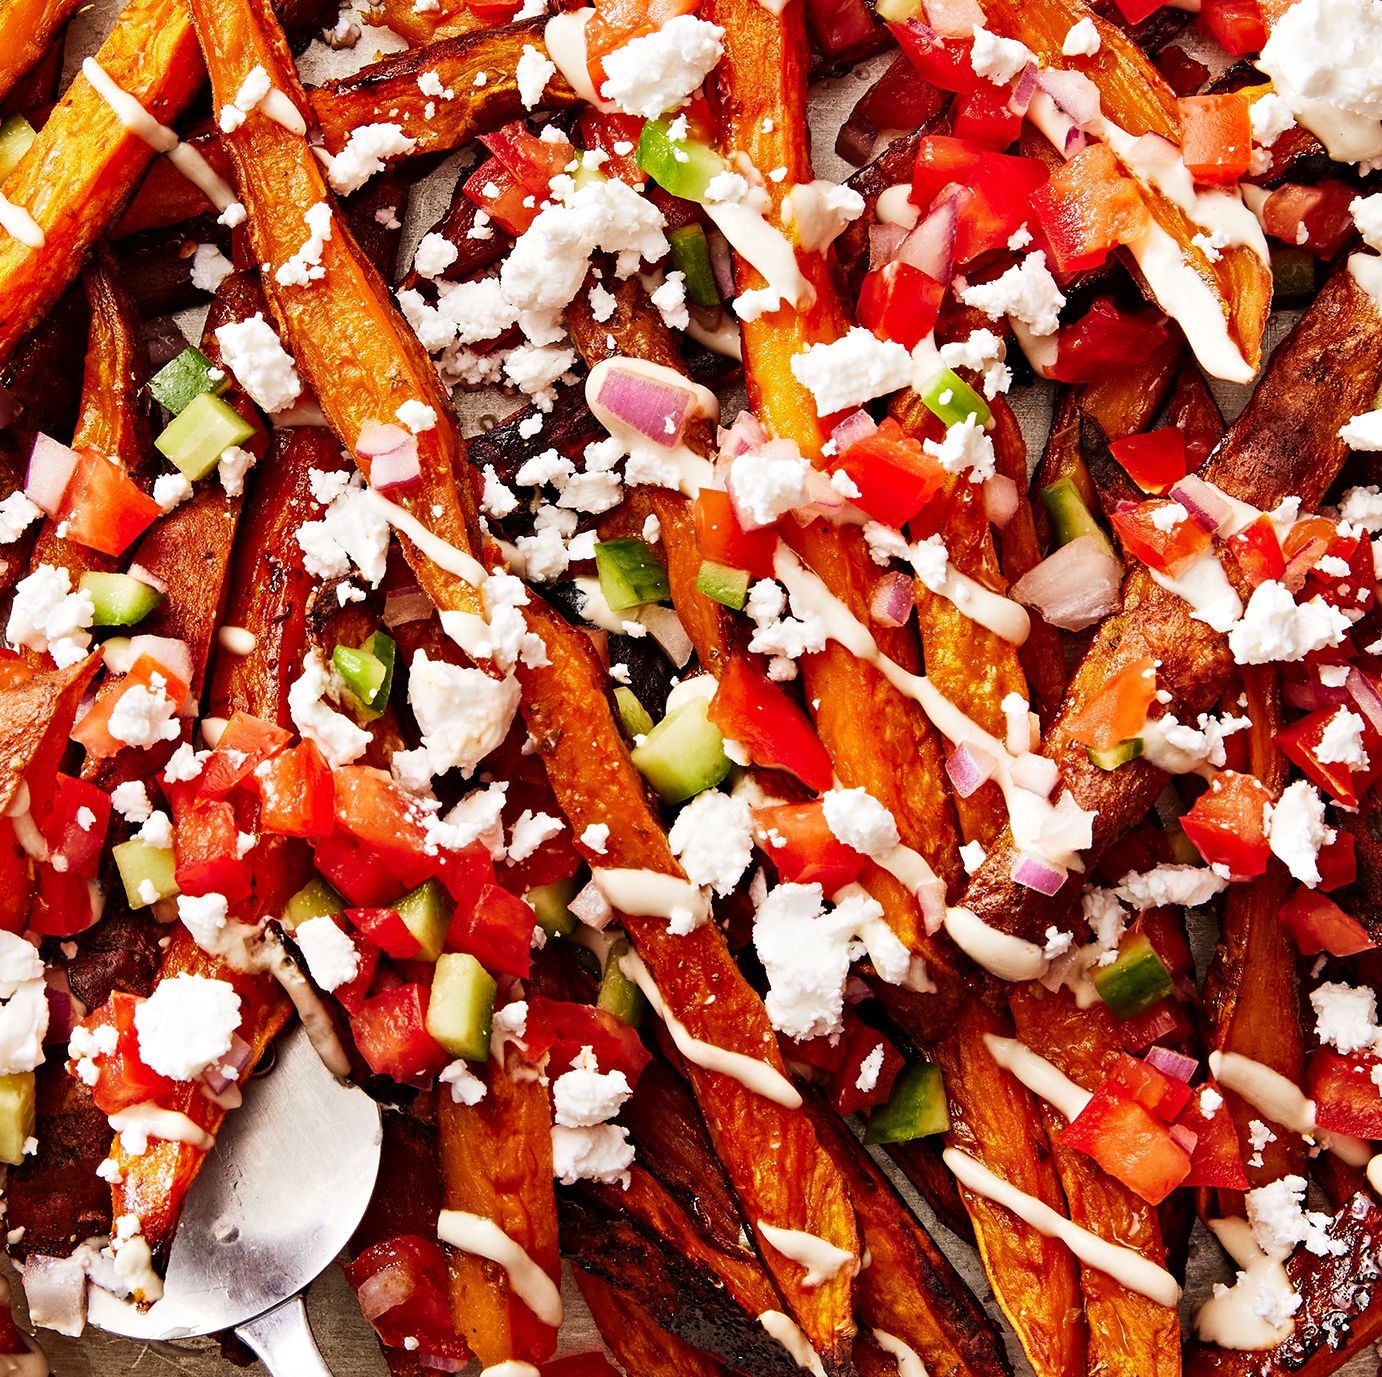 These Mediterranean Sweet Potato Fries Are Loaded With Texture & Flavor